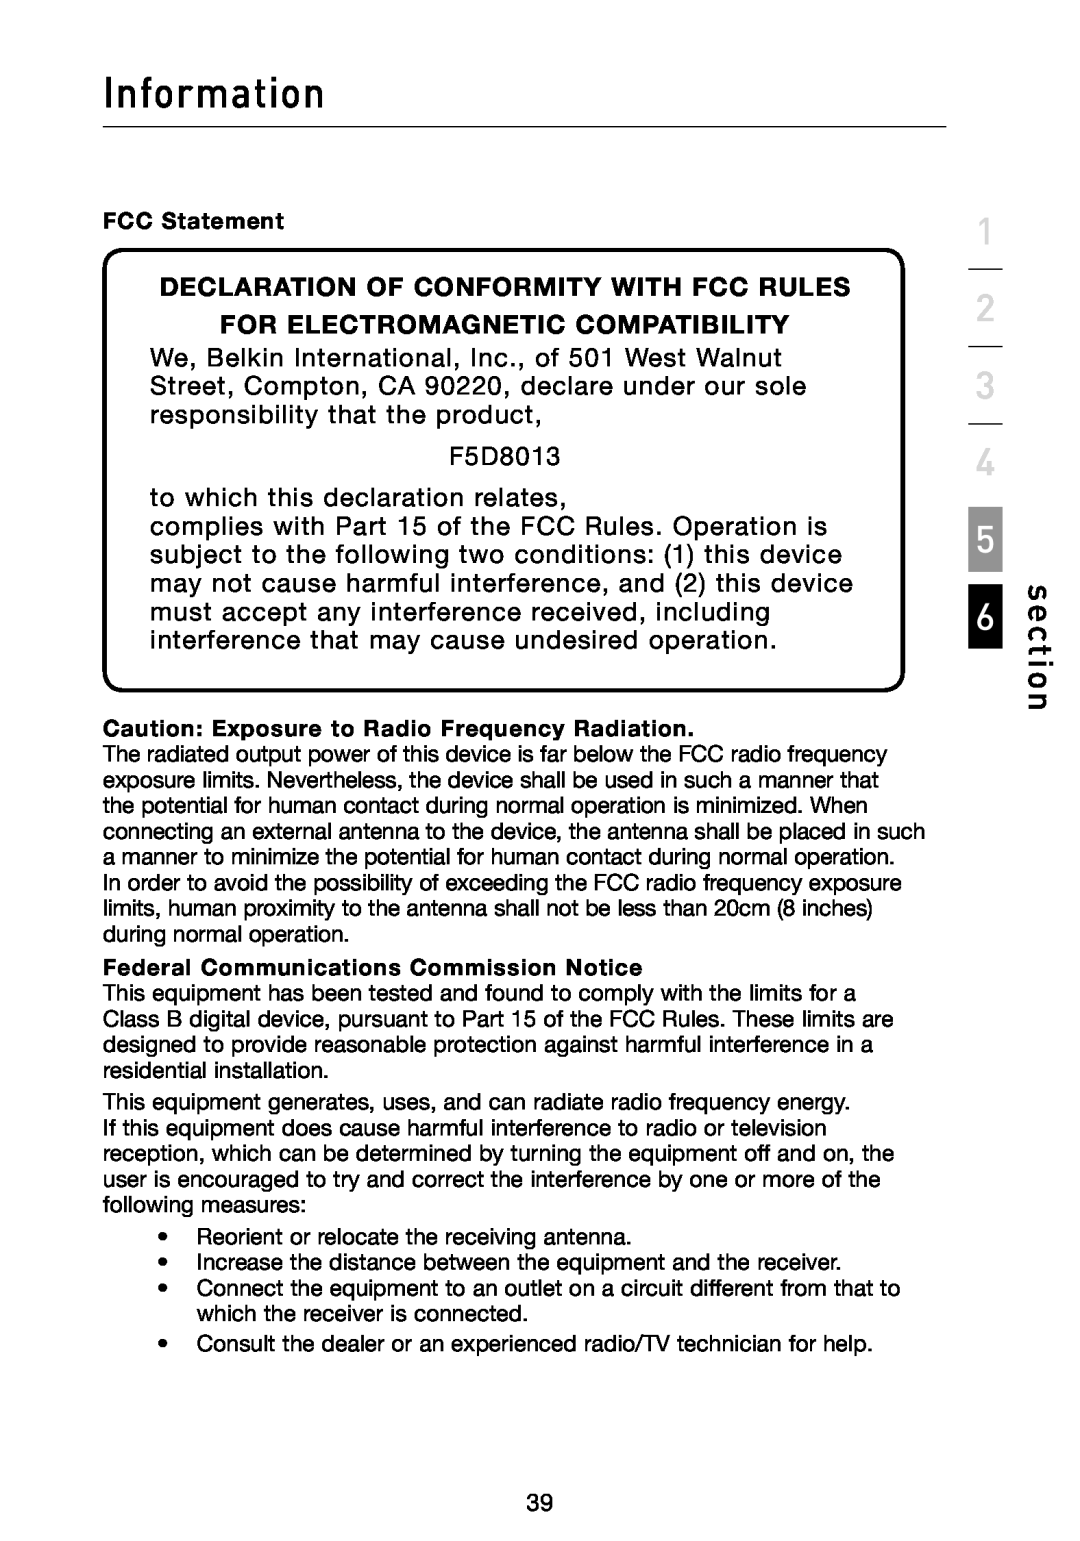 Belkin F5D8013 Information, Declaration Of Conformity With Fcc Rules, For Electromagnetic Compatibility, section 